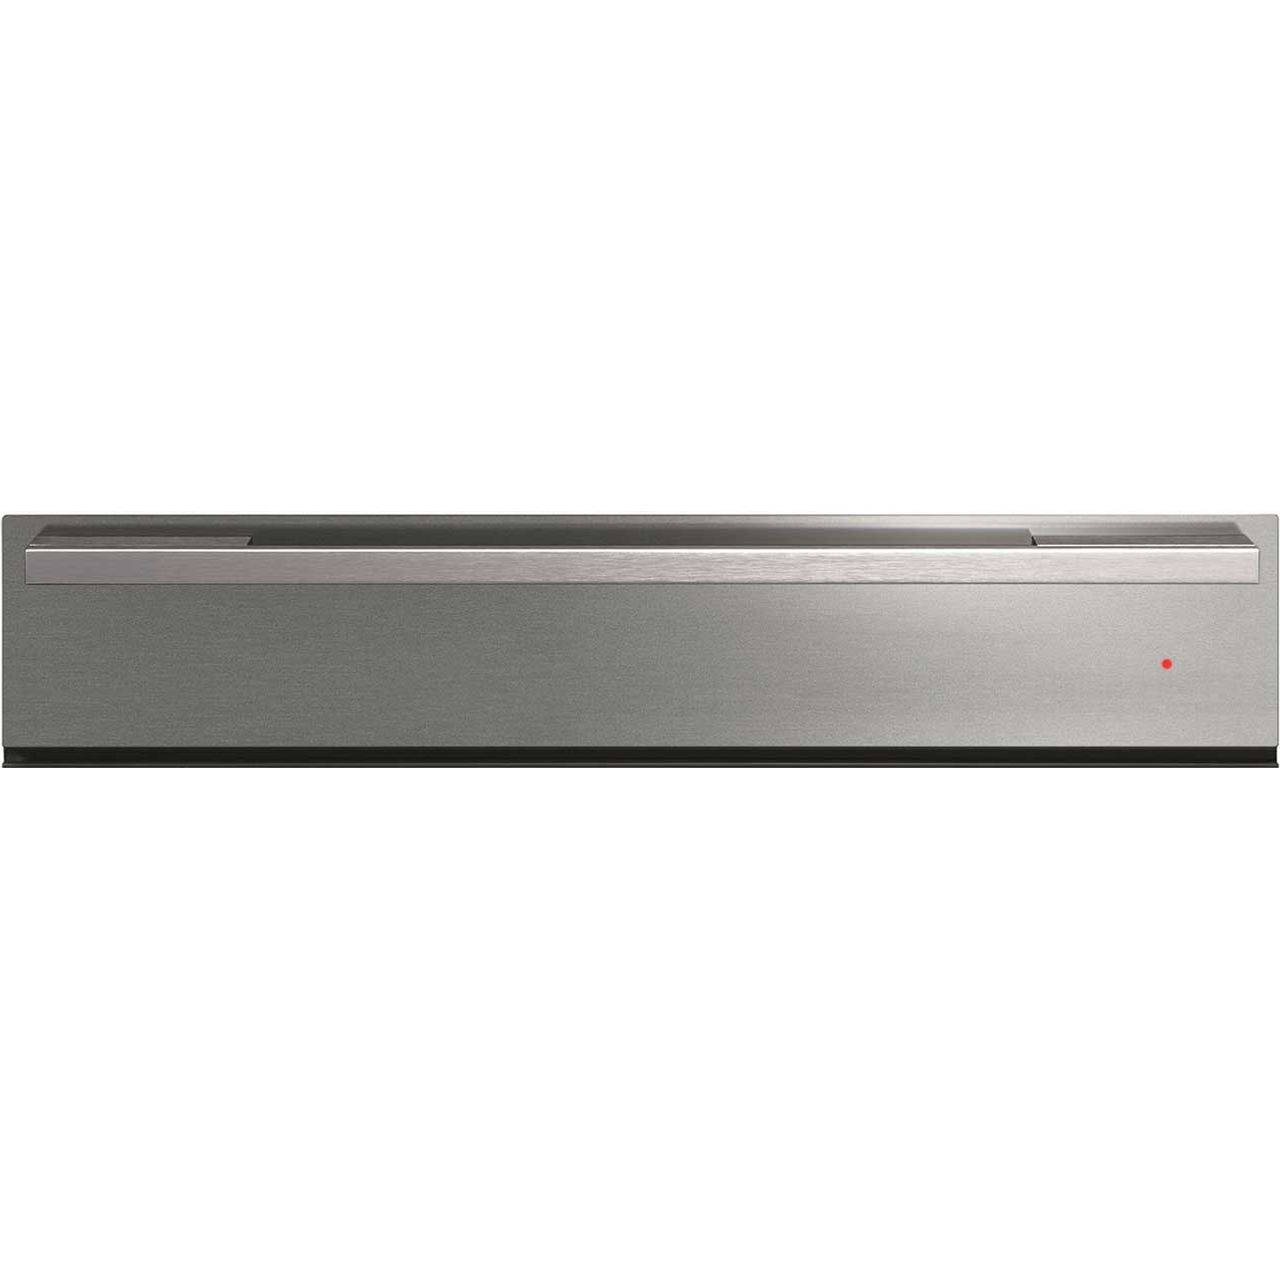 Fisher & Paykel WB60SDEX1 Built In Warming Drawer Review